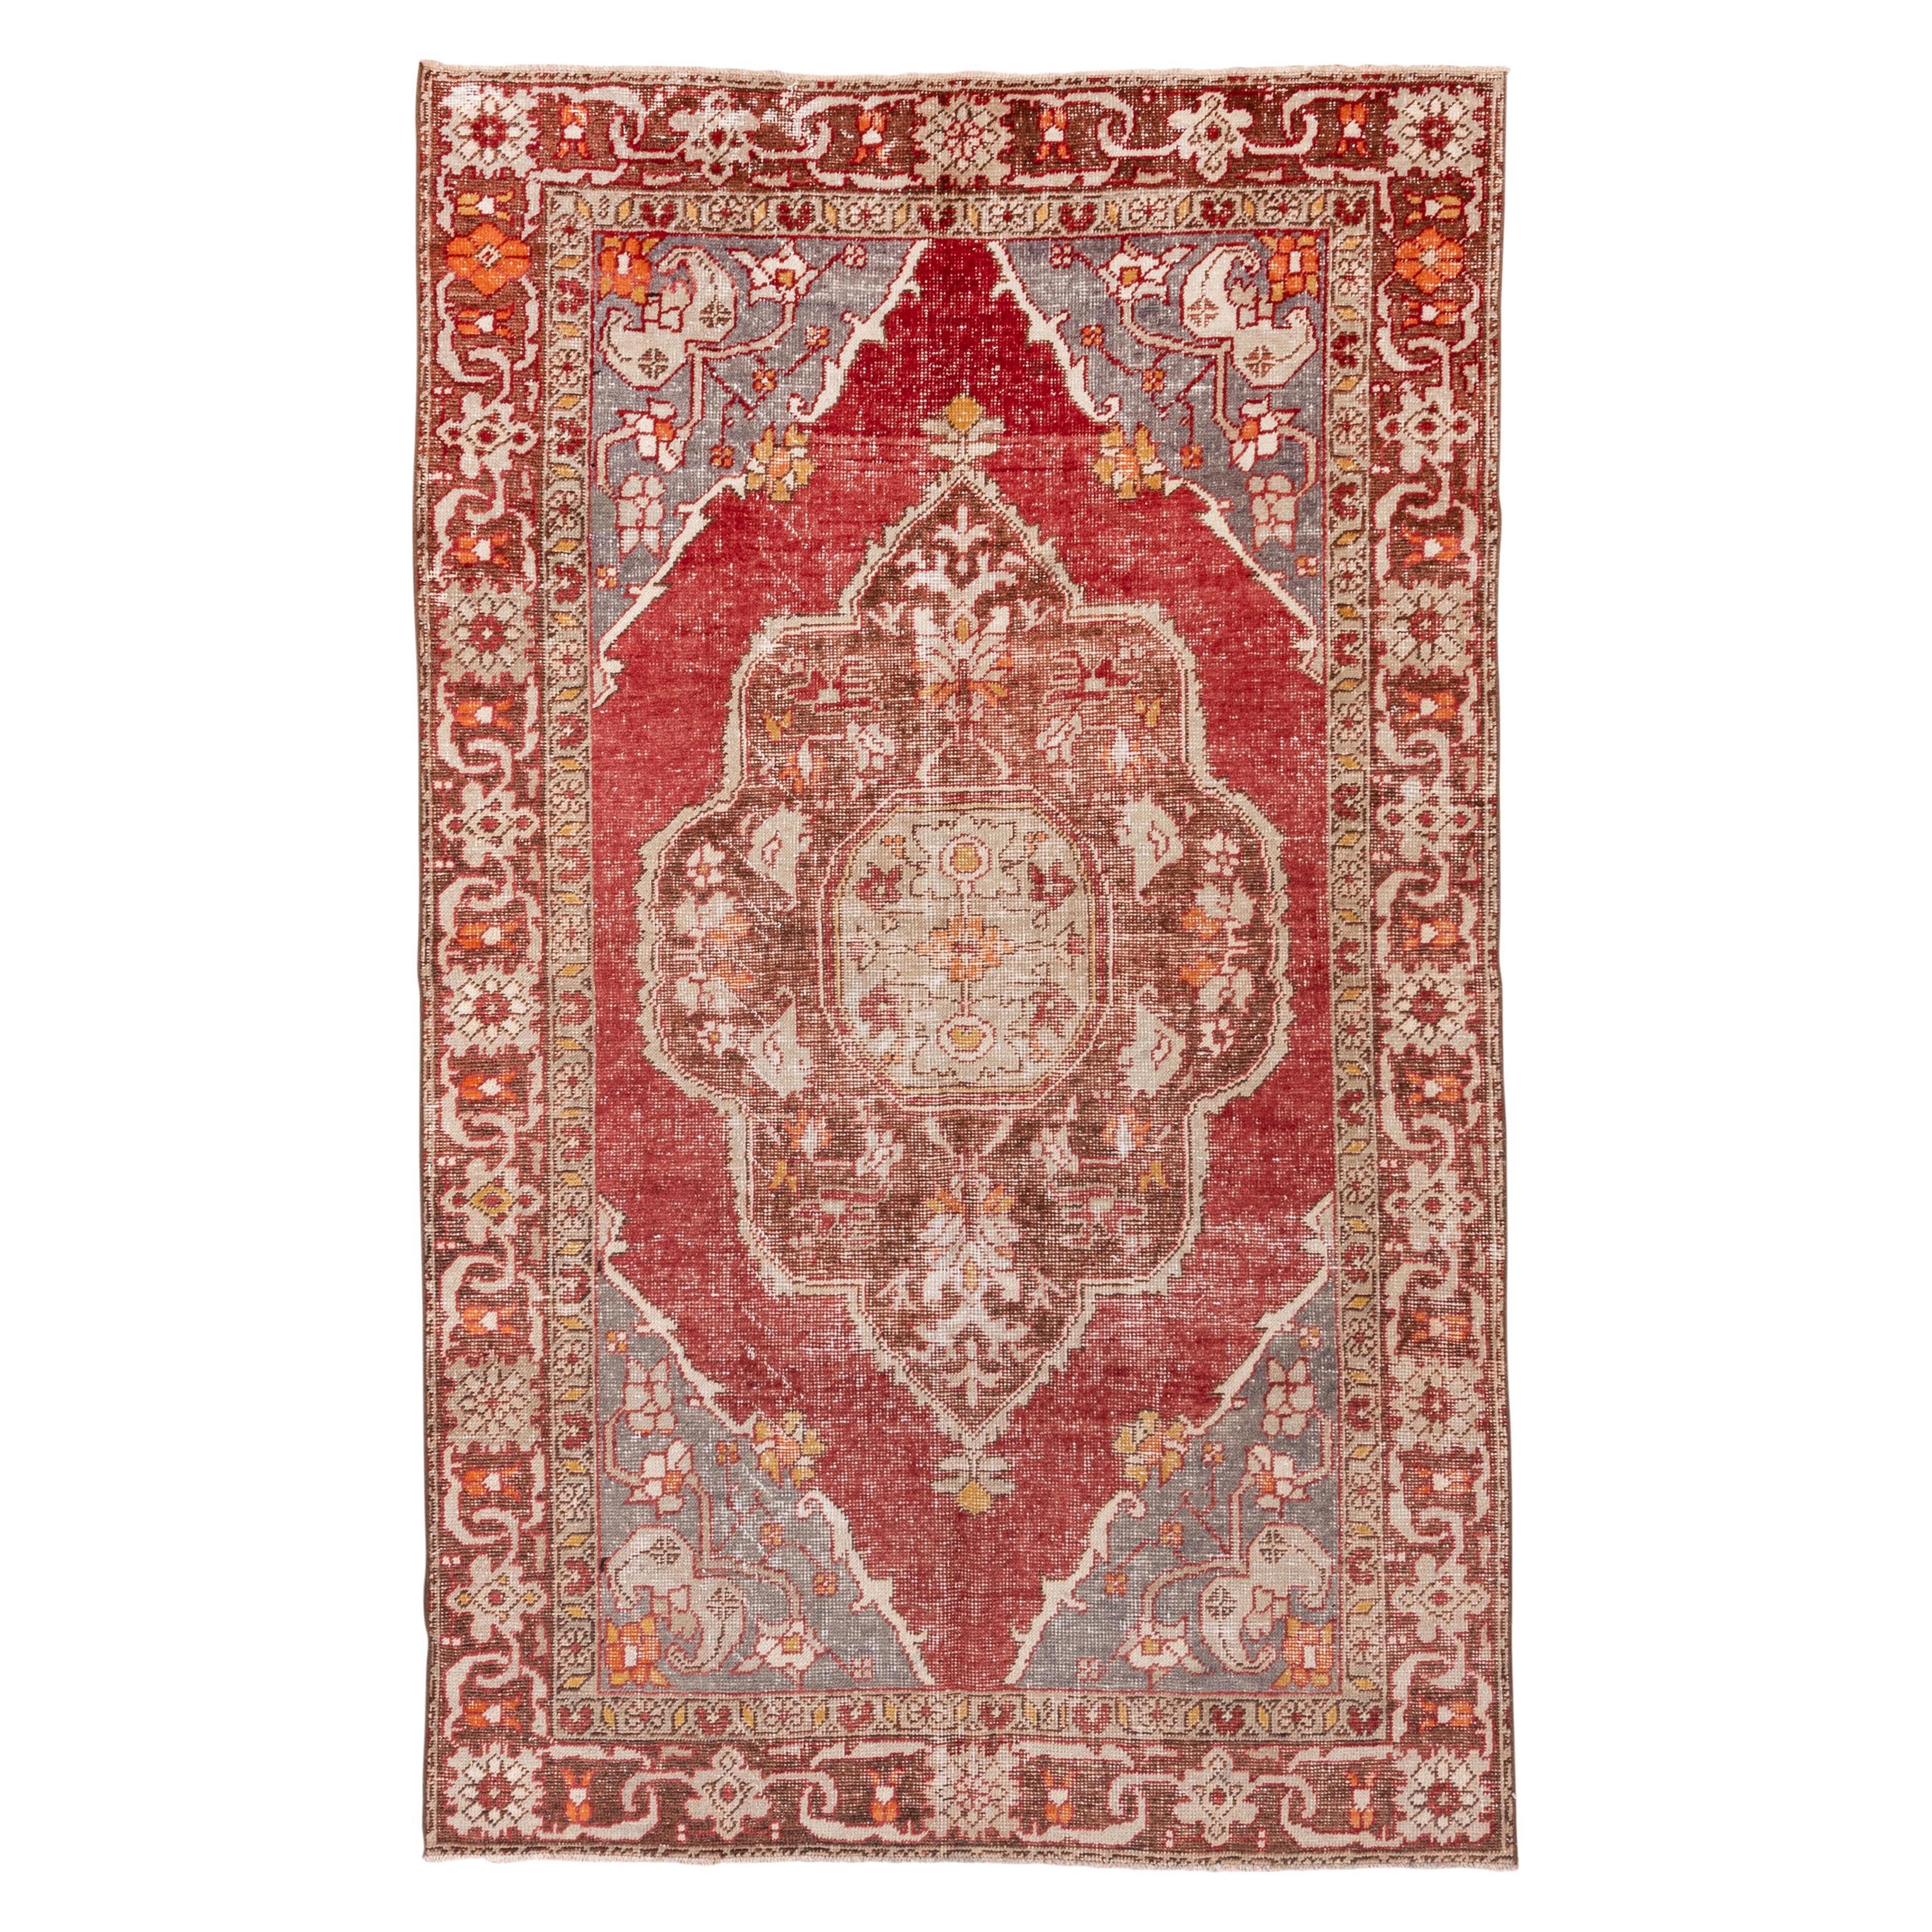 Antique Turkish Oushak Rug, Red, Gray and Brown Field, Even Wear For Sale